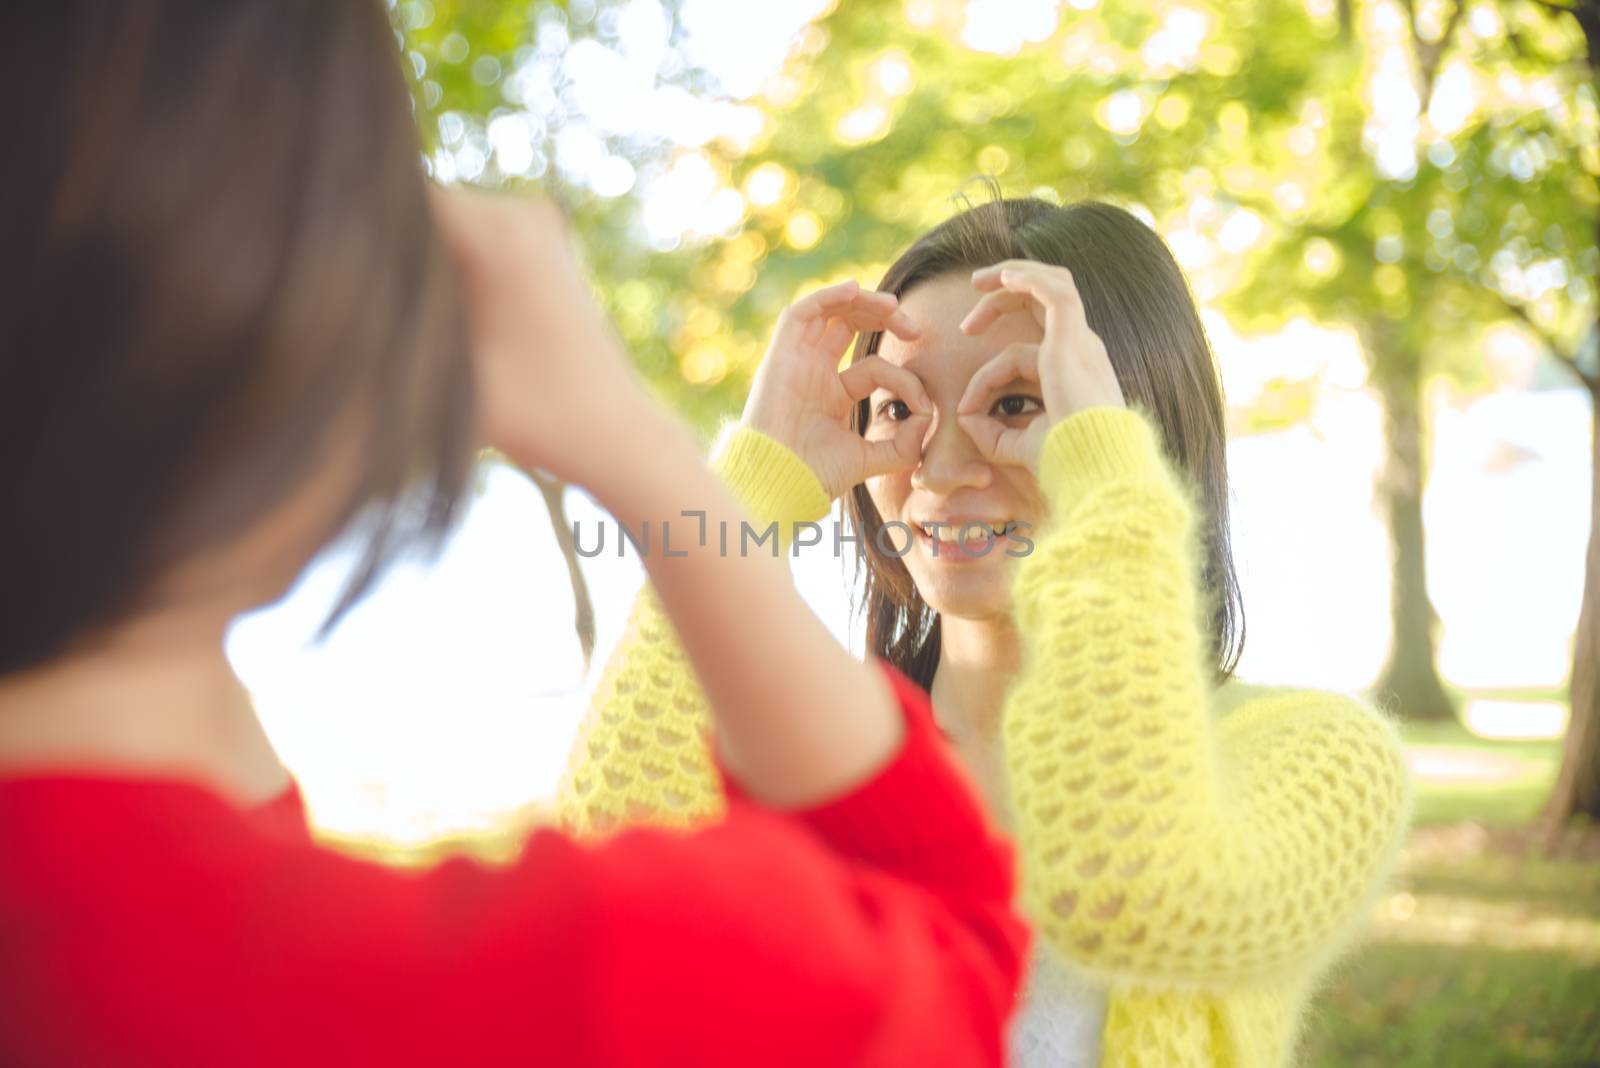 Two young girls posing hand signals to each other in a park showing friendship